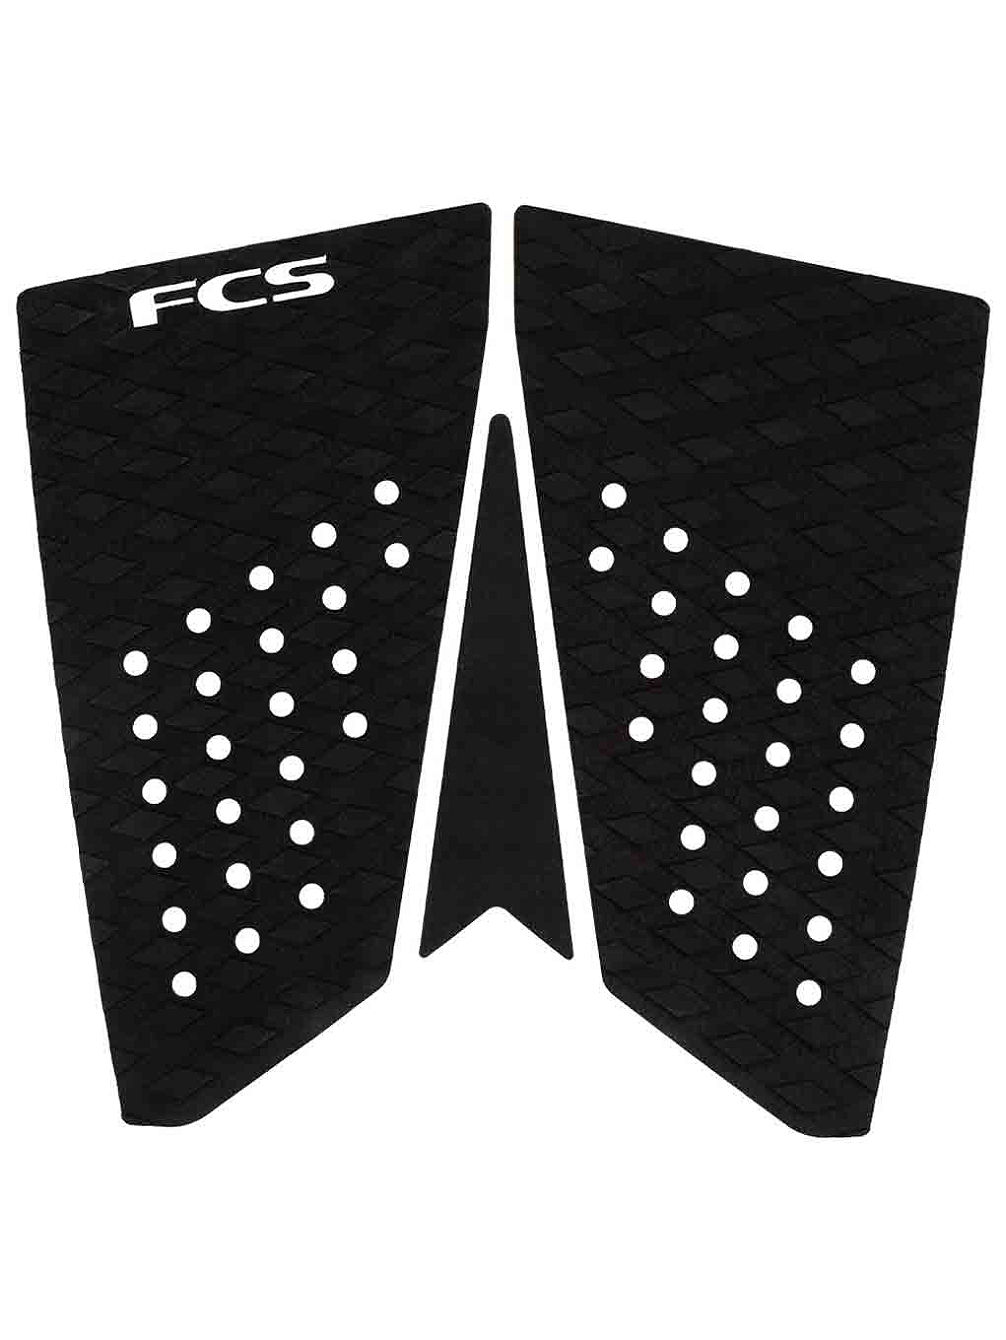 T-3 Fish Traction Tail Pad